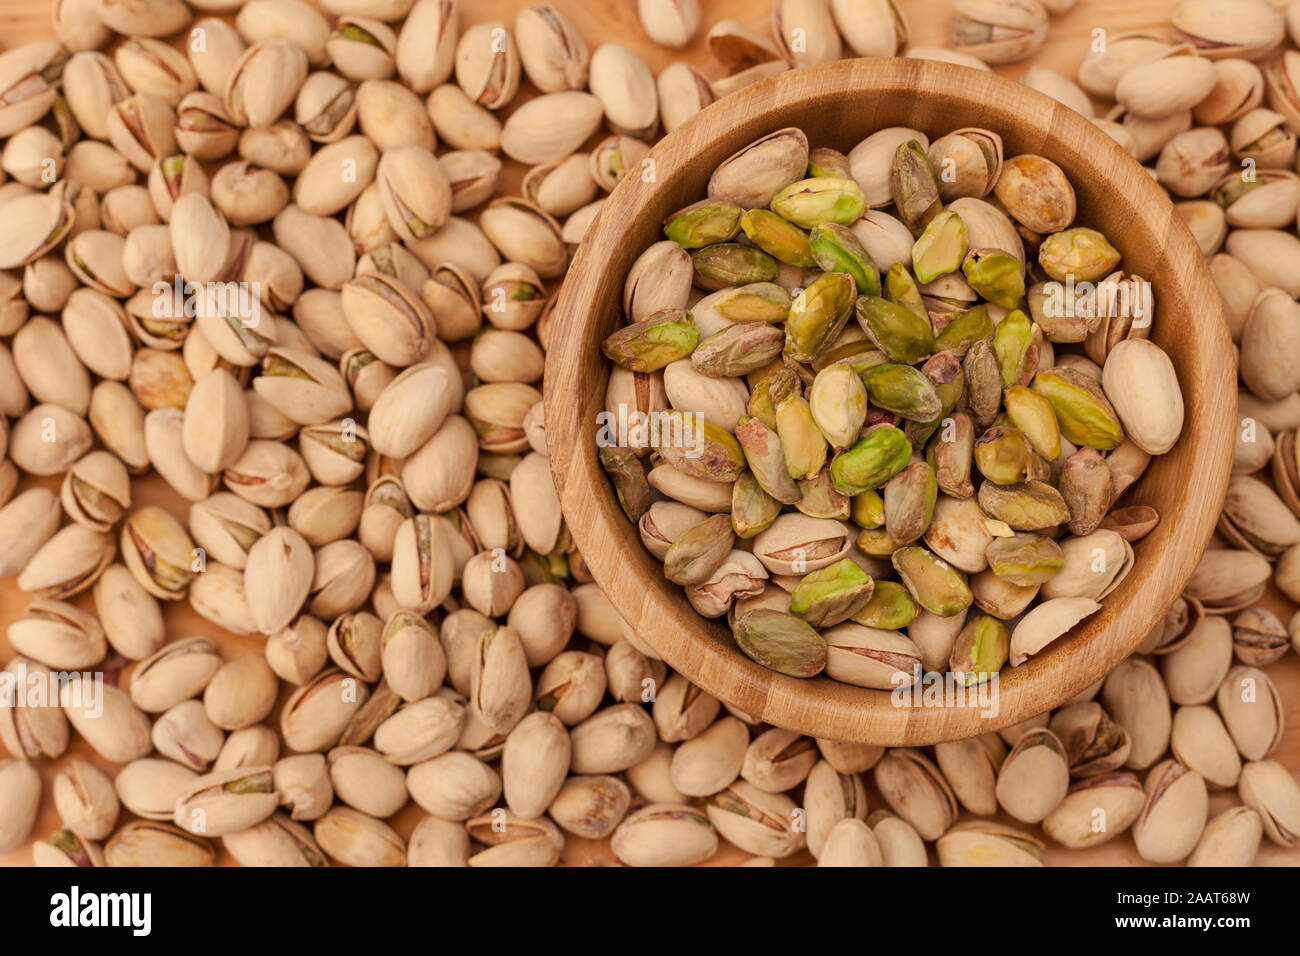 Top view of shell and peeled pistachios in wooden bowl and on wooden table. Stock Photo